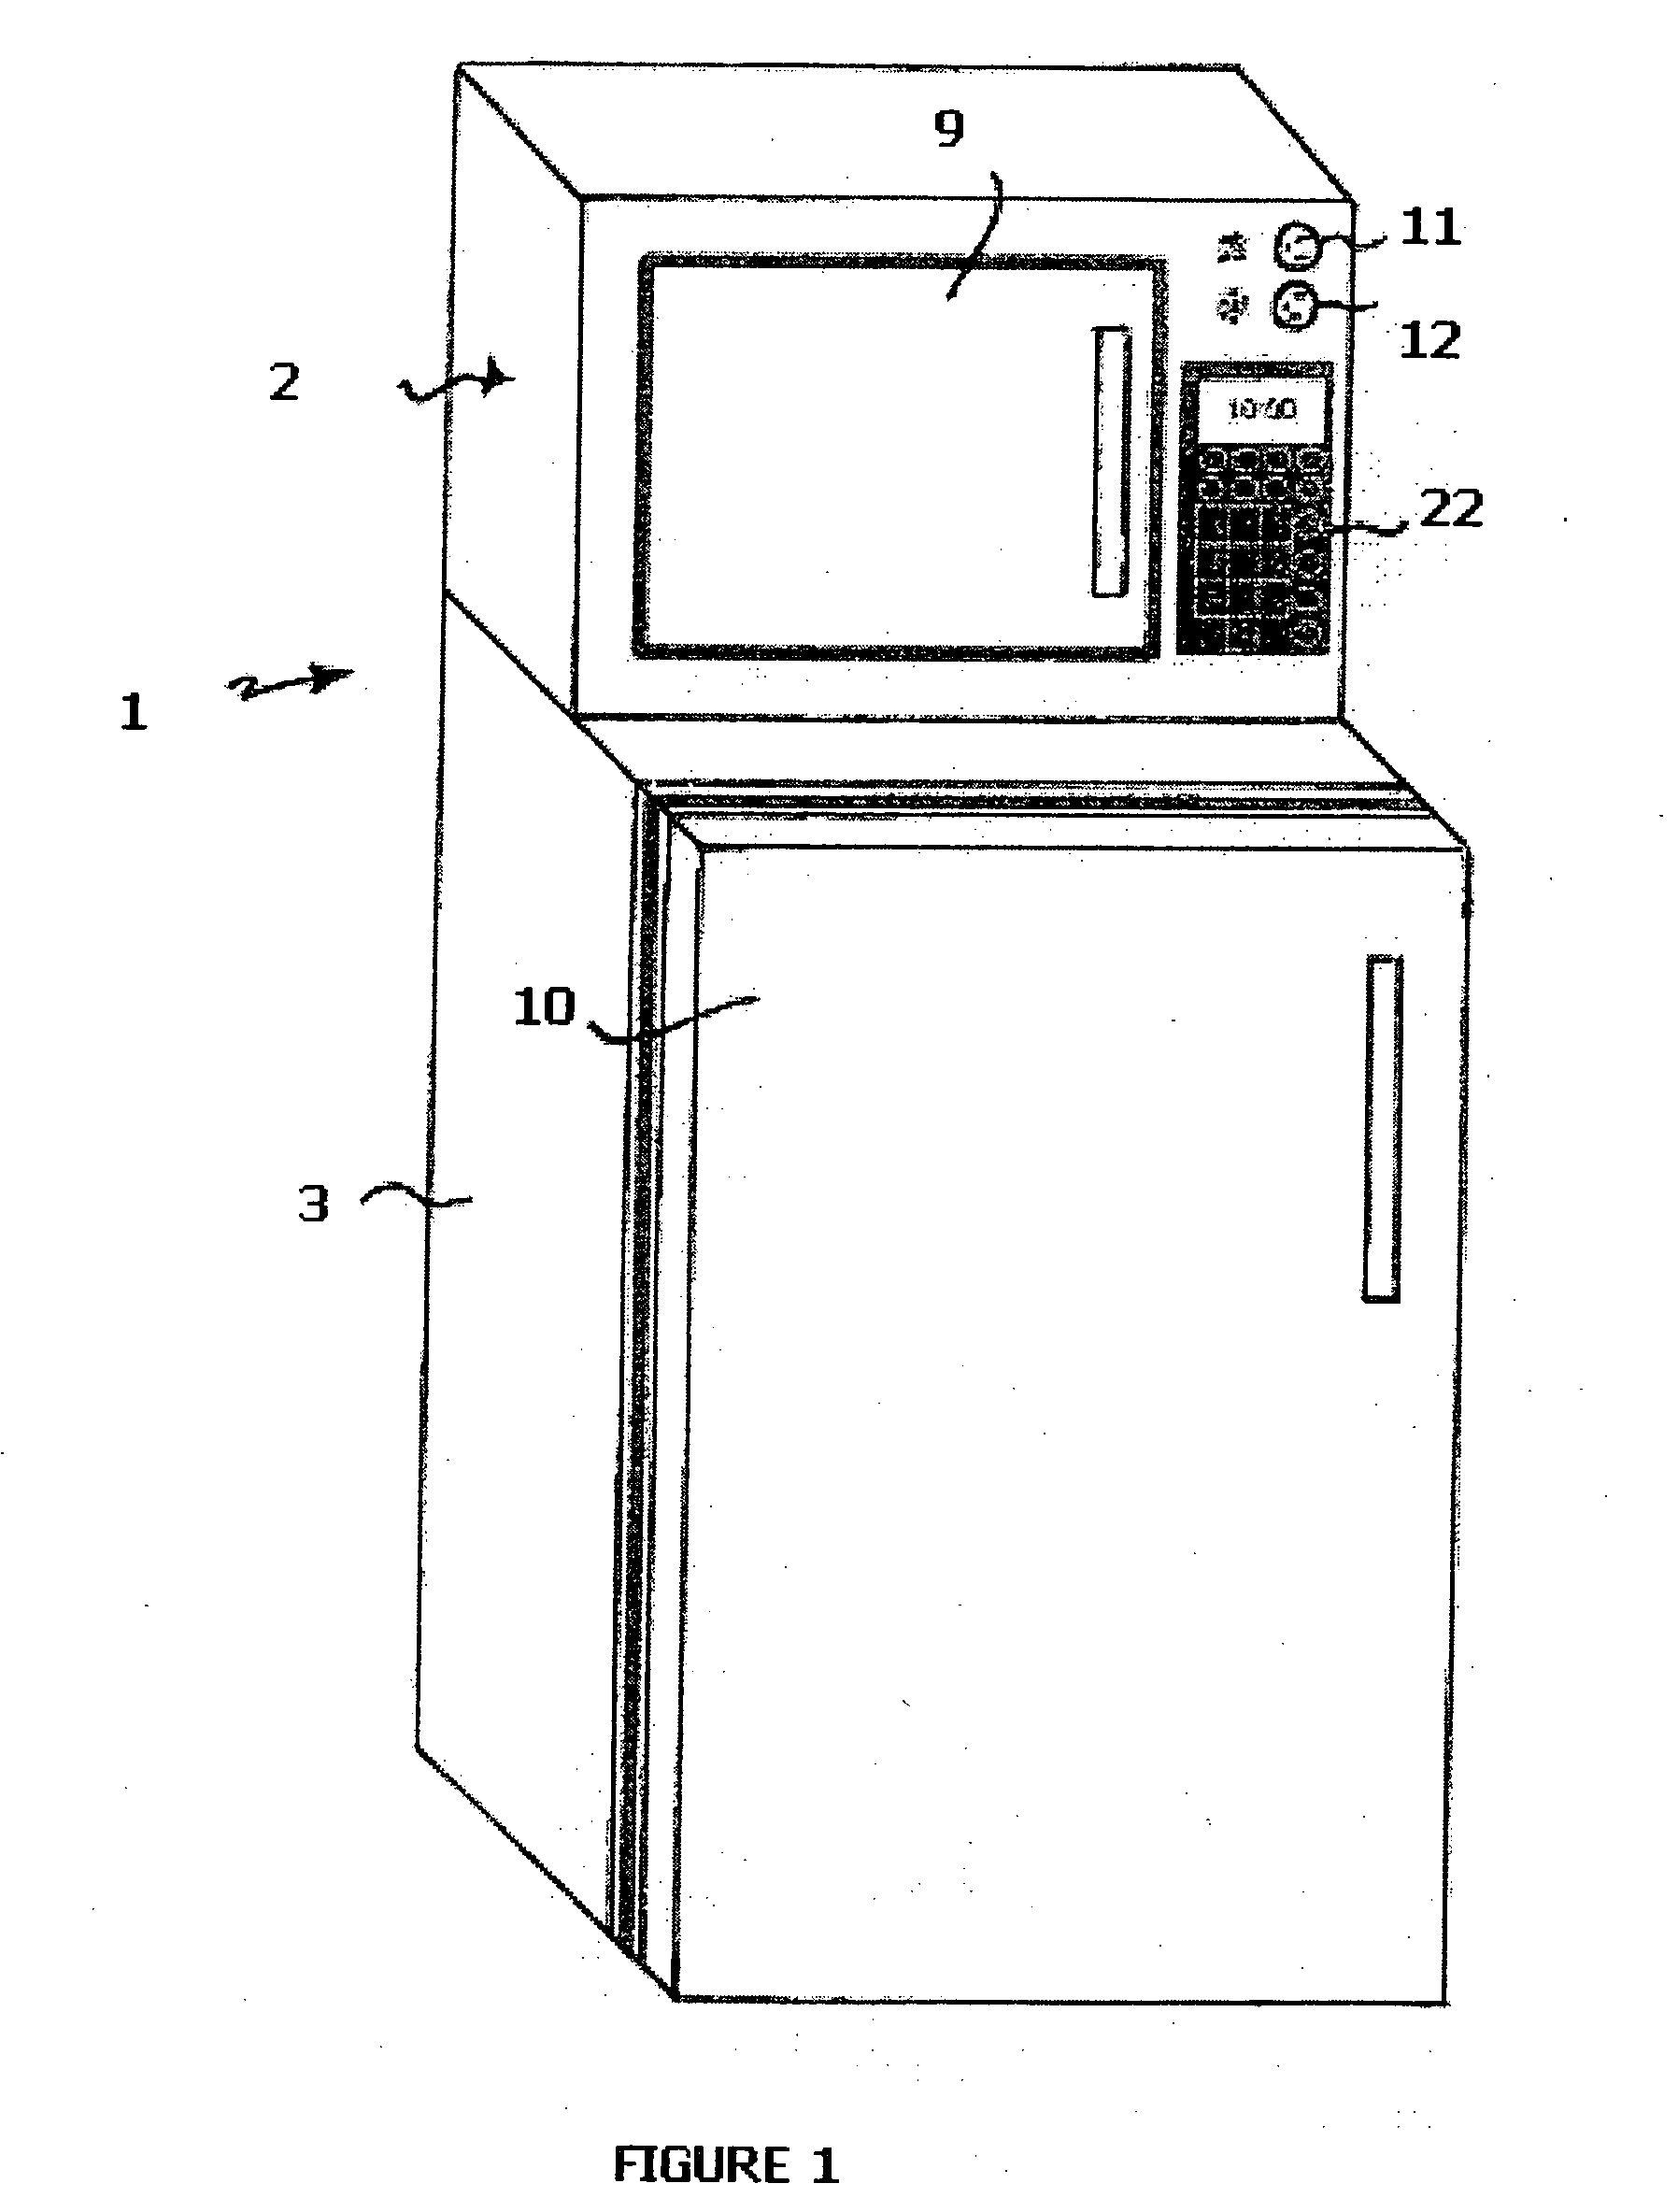 Multiple linked appliances with auxiliary outlet